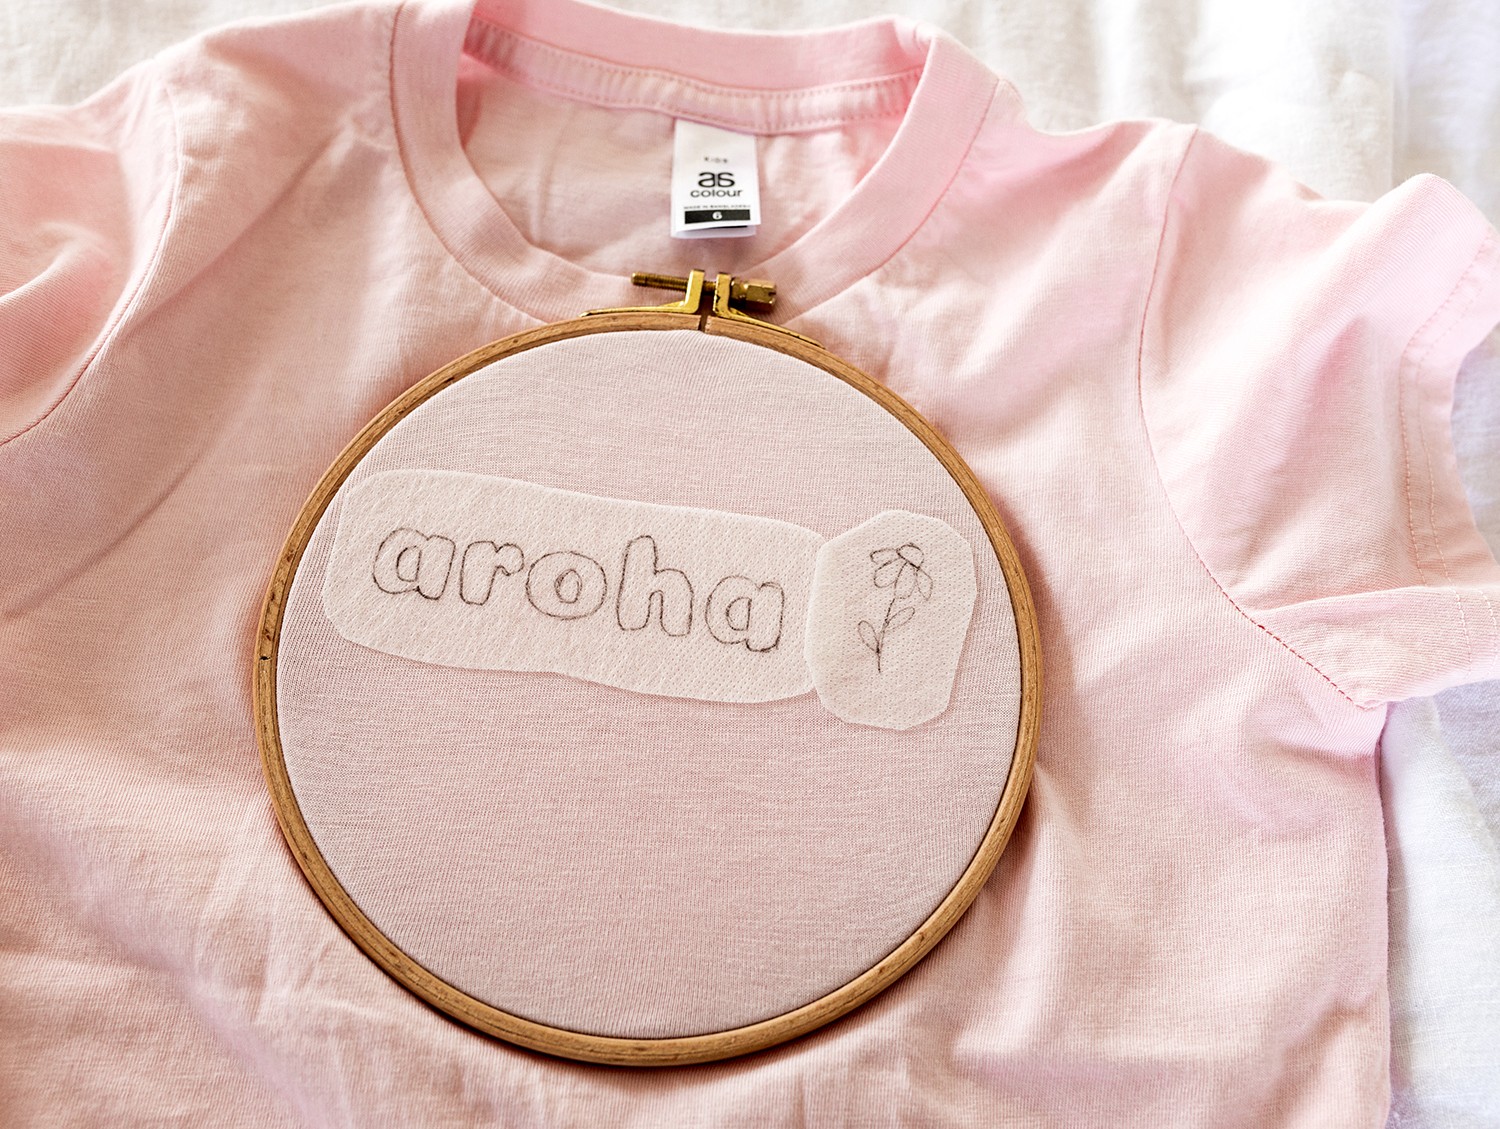 A pattern 'aroha' and a flower is placed on a tshirt.